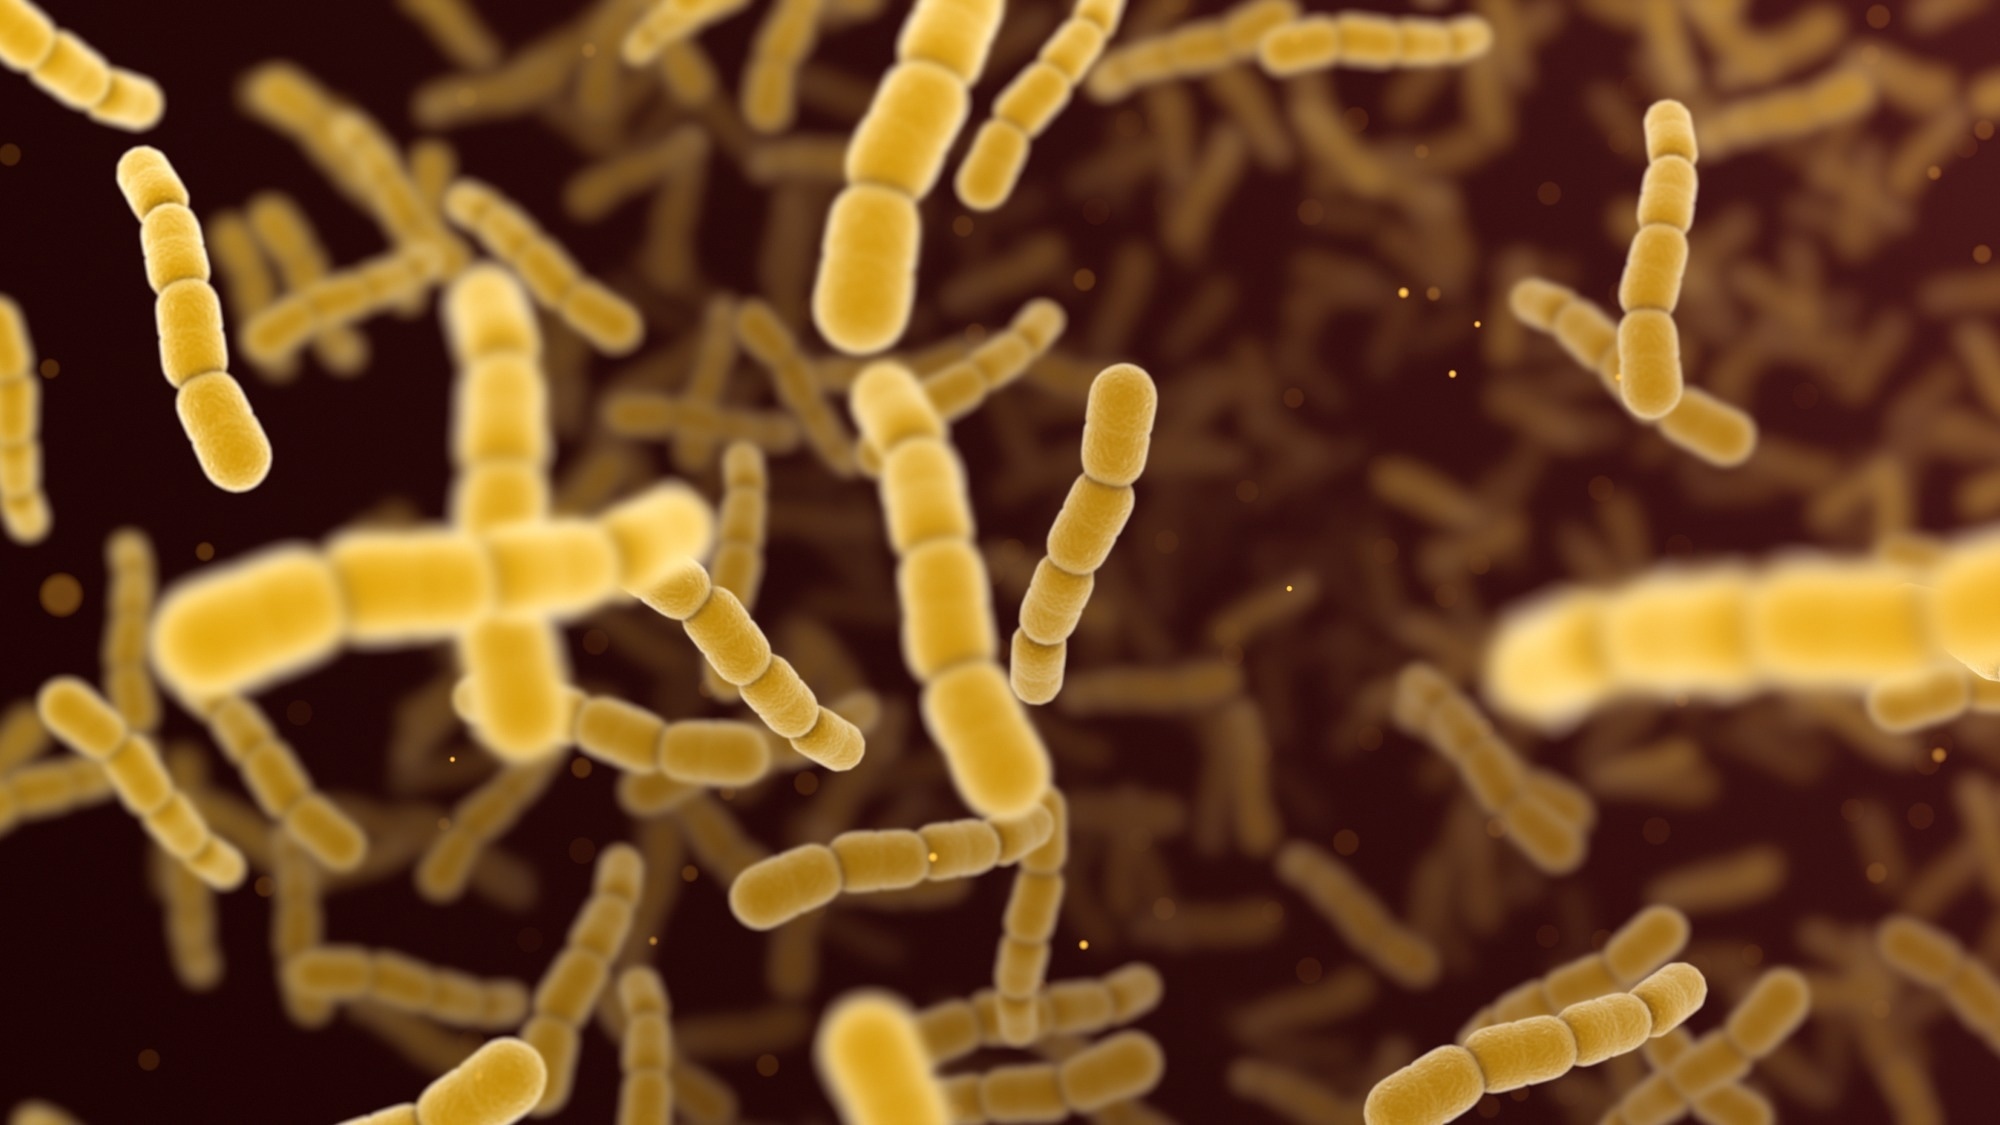 Study: Increase in invasive group A streptococcal infections and emergence of novel, rapidly expanding sub-lineage of the virulent Streptococcus pyogenes M1 clone, Denmark, 2023. Image Credit: Jezper/Shutterstock.com